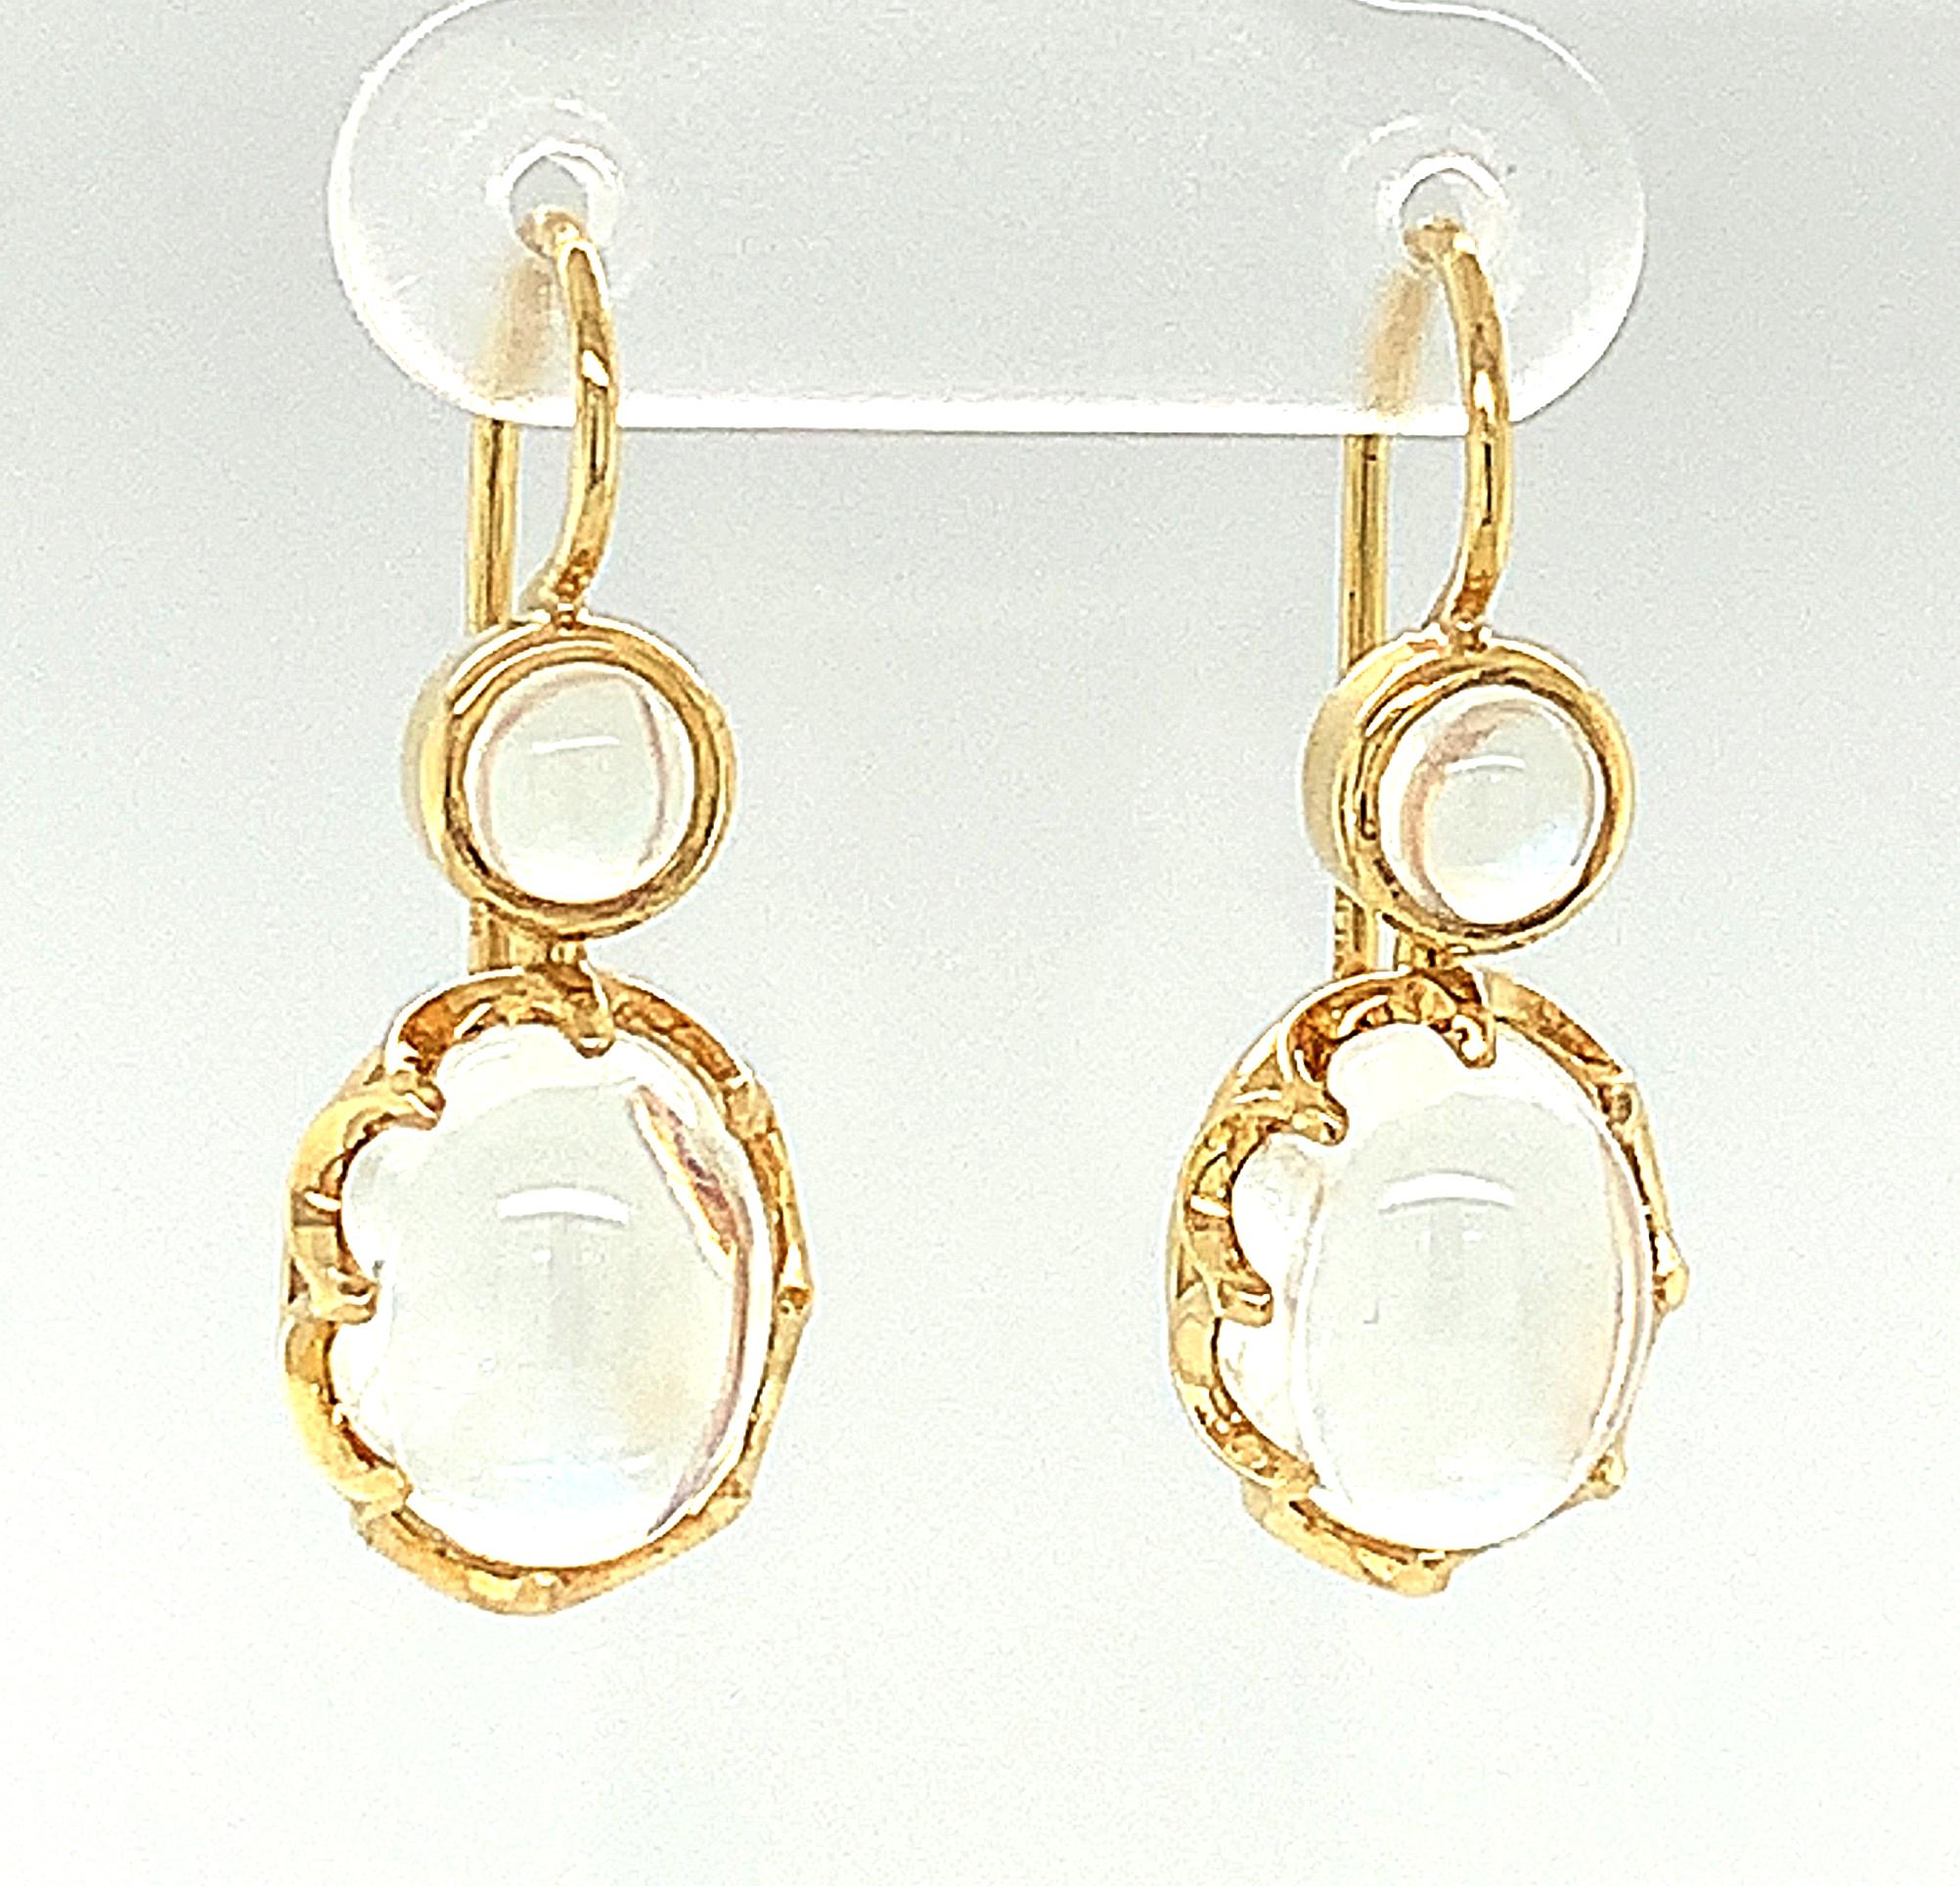 These beautiful drop earrings are subtle and elegant and have a magical quality of light. They feature moonstones that are extremely clean and transparent and display a fine, blue, adularescence, or 